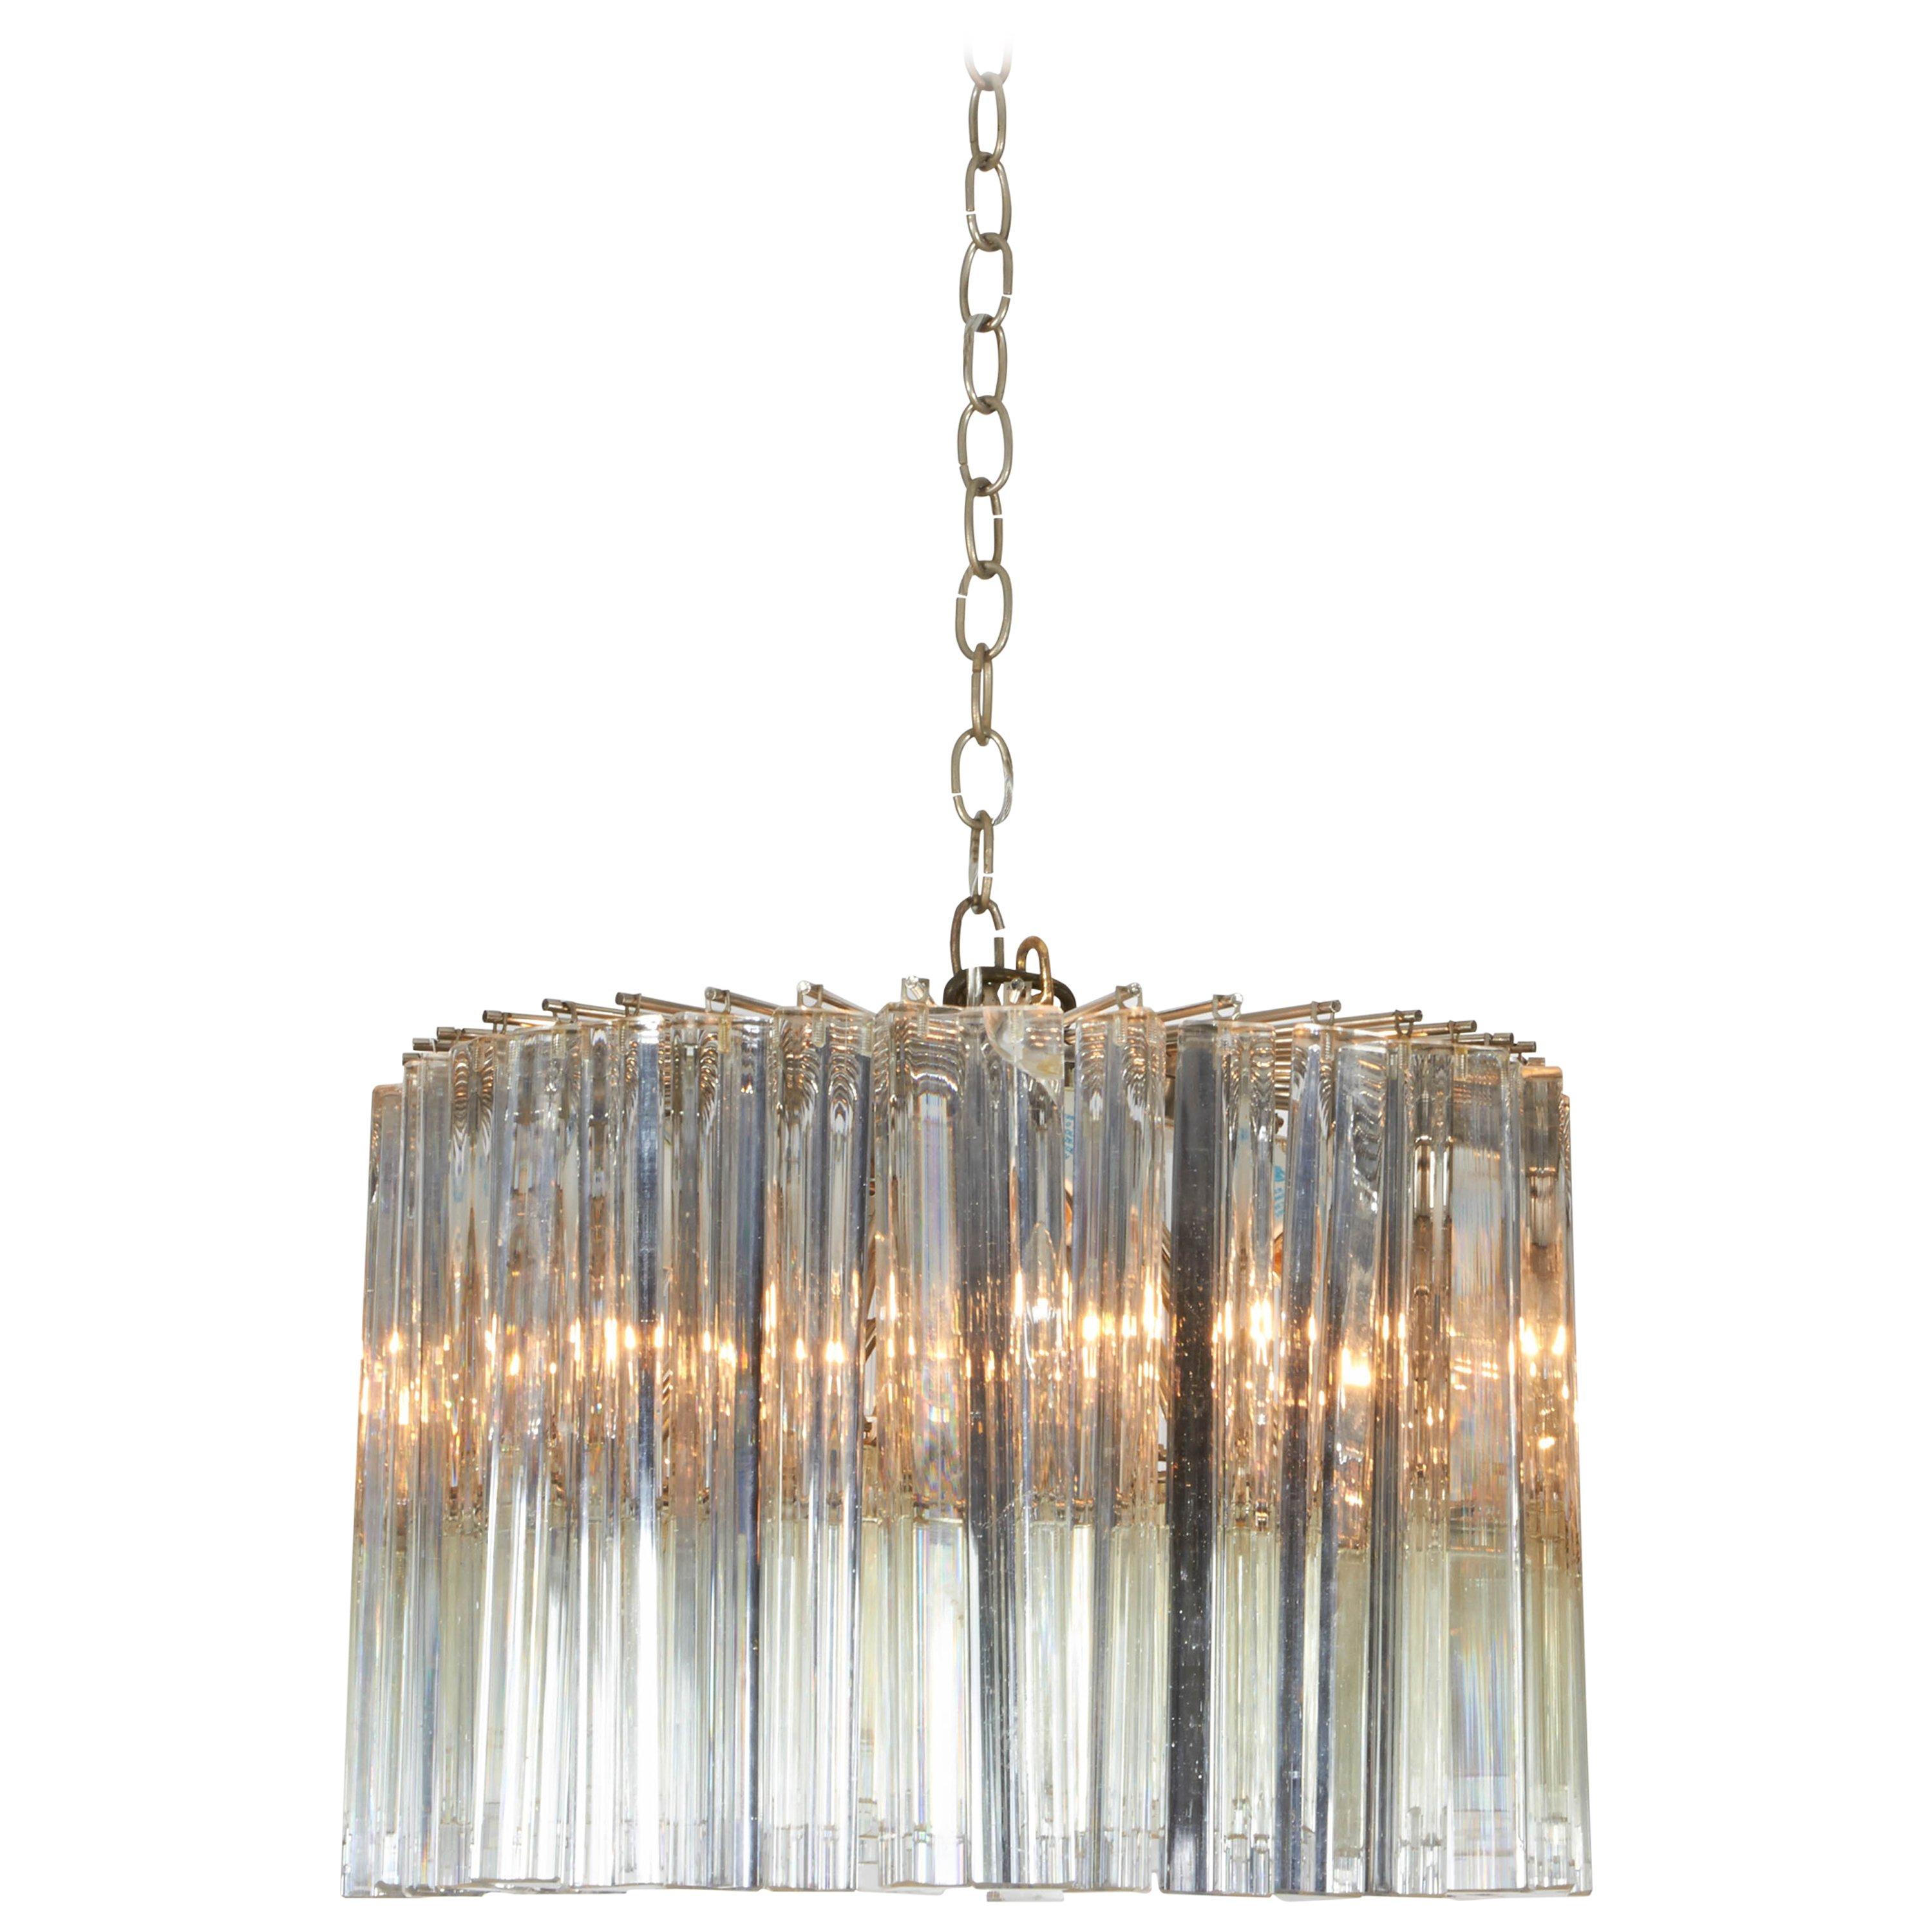 Dramatic Crystal Chandelier by Camer